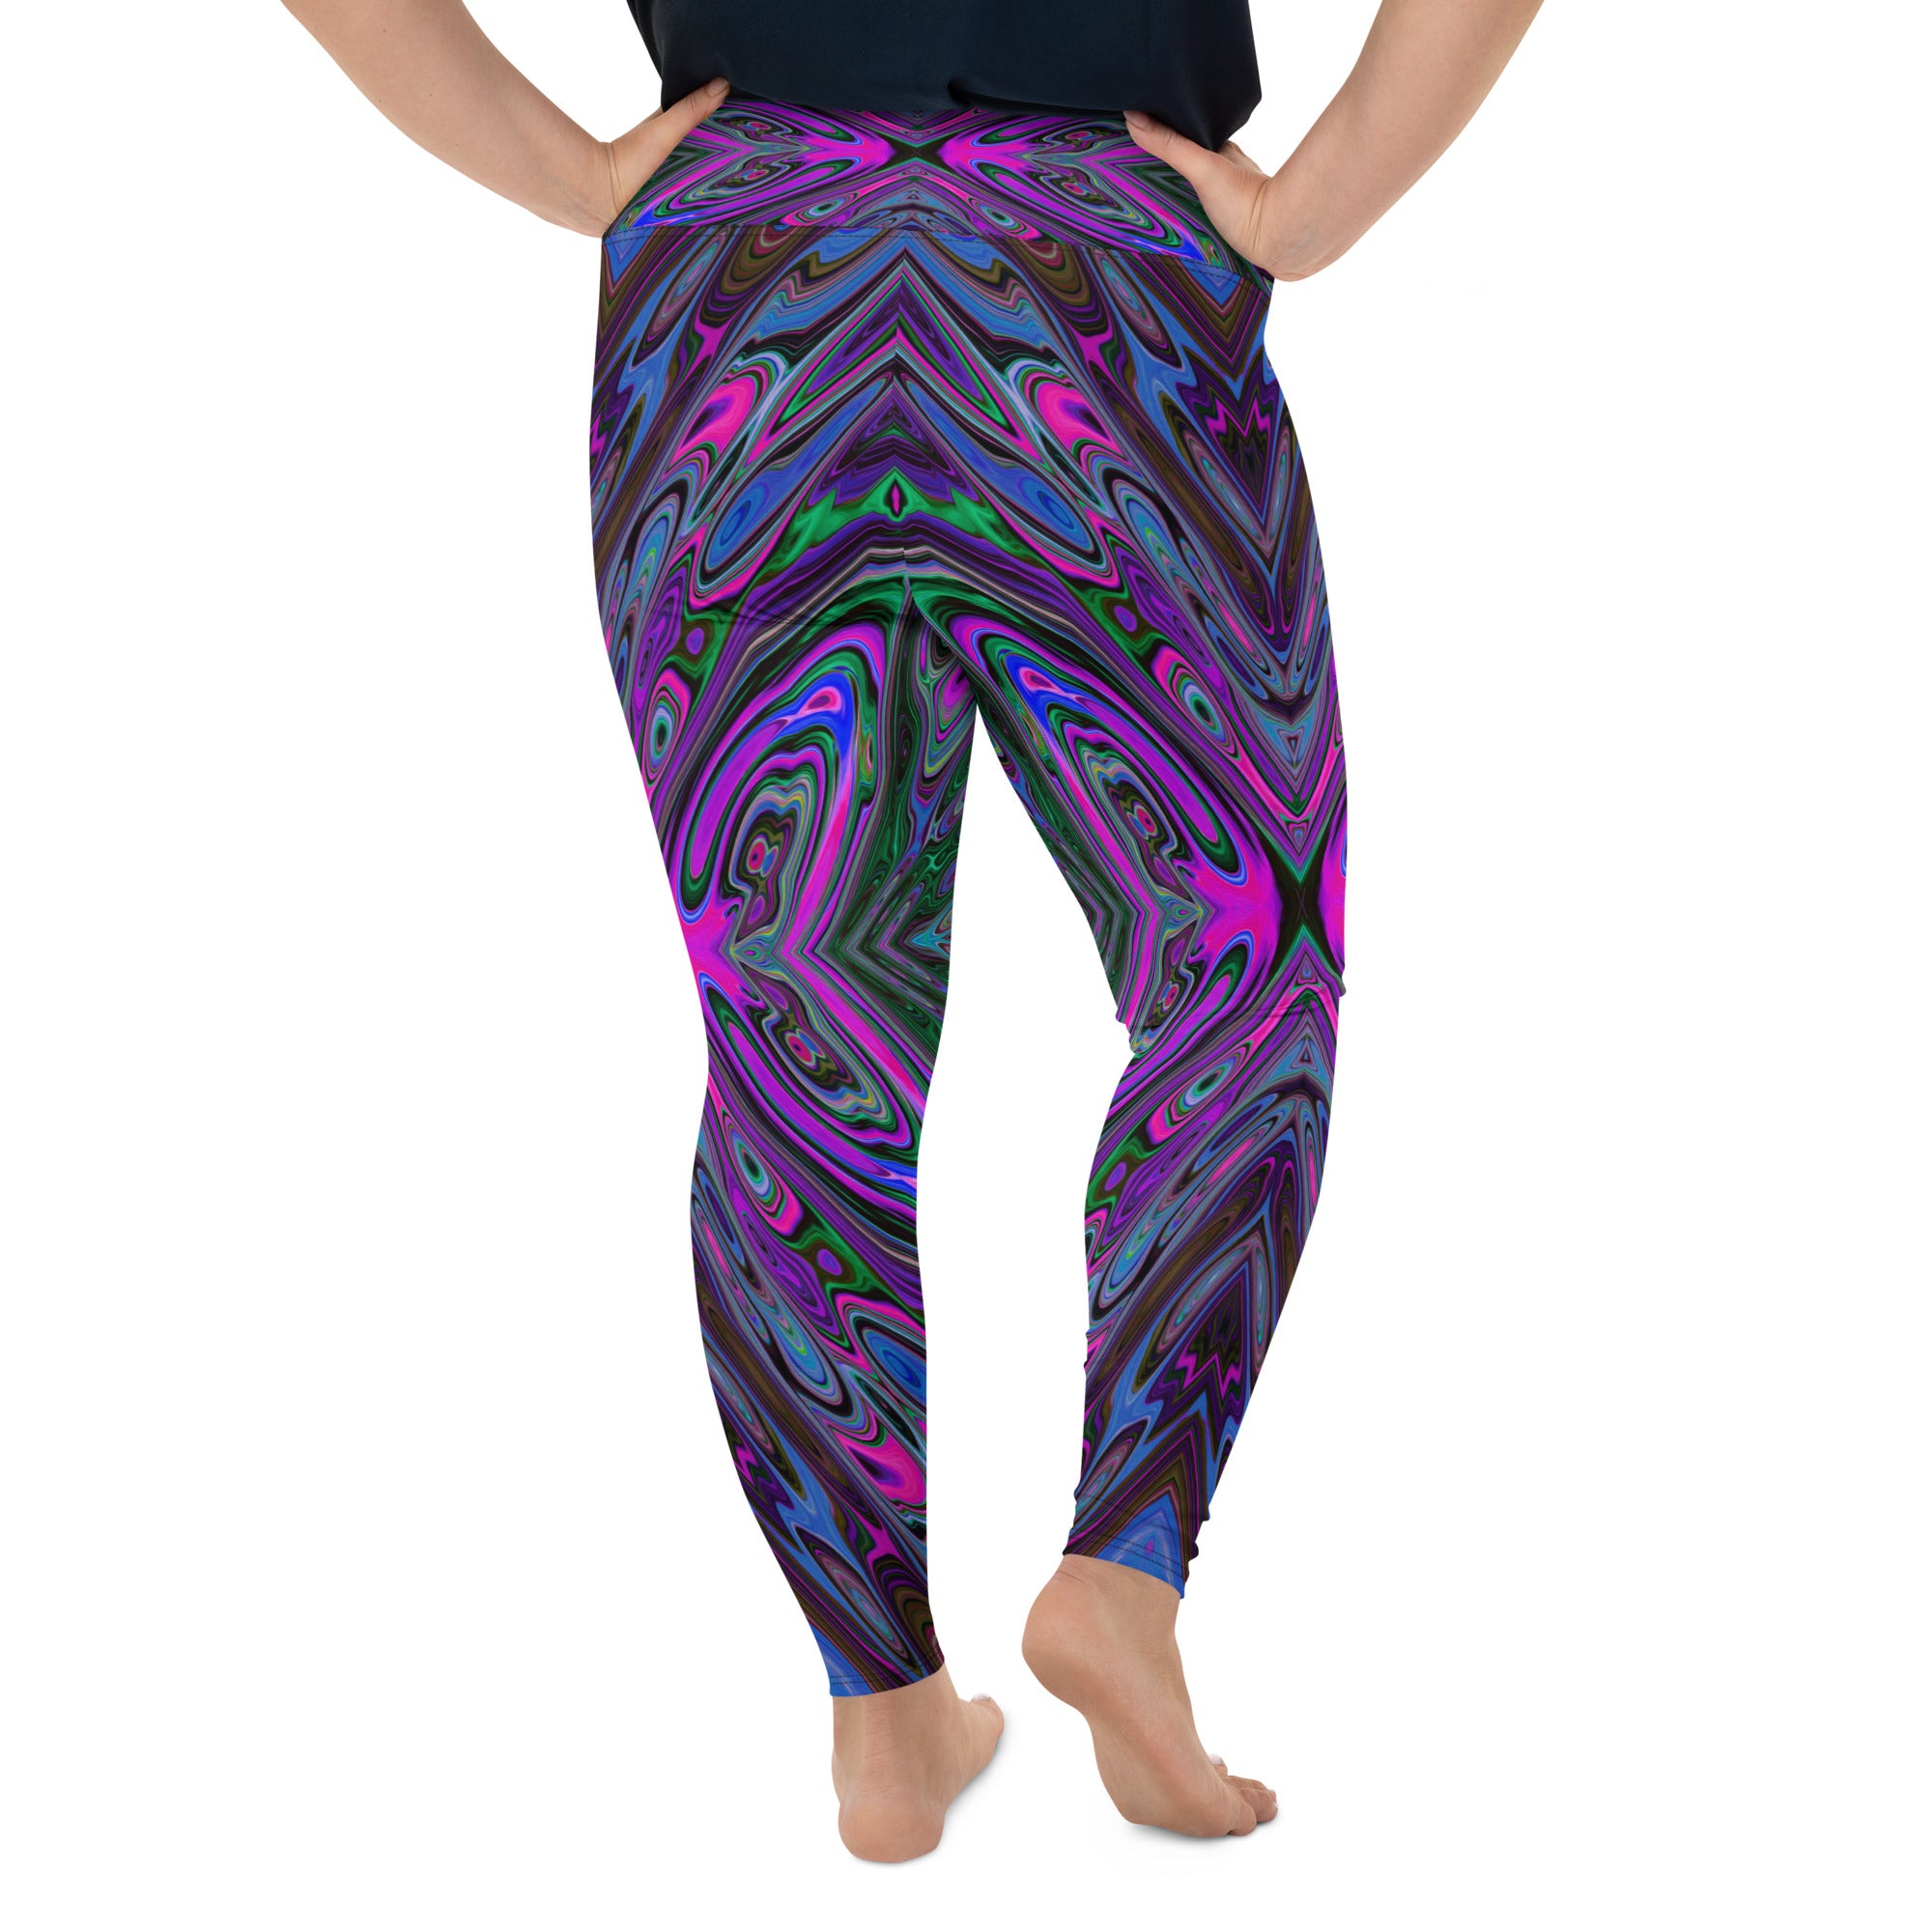 Plus Size Leggings, Trippy Magenta, Blue and Green Abstract Butterfly